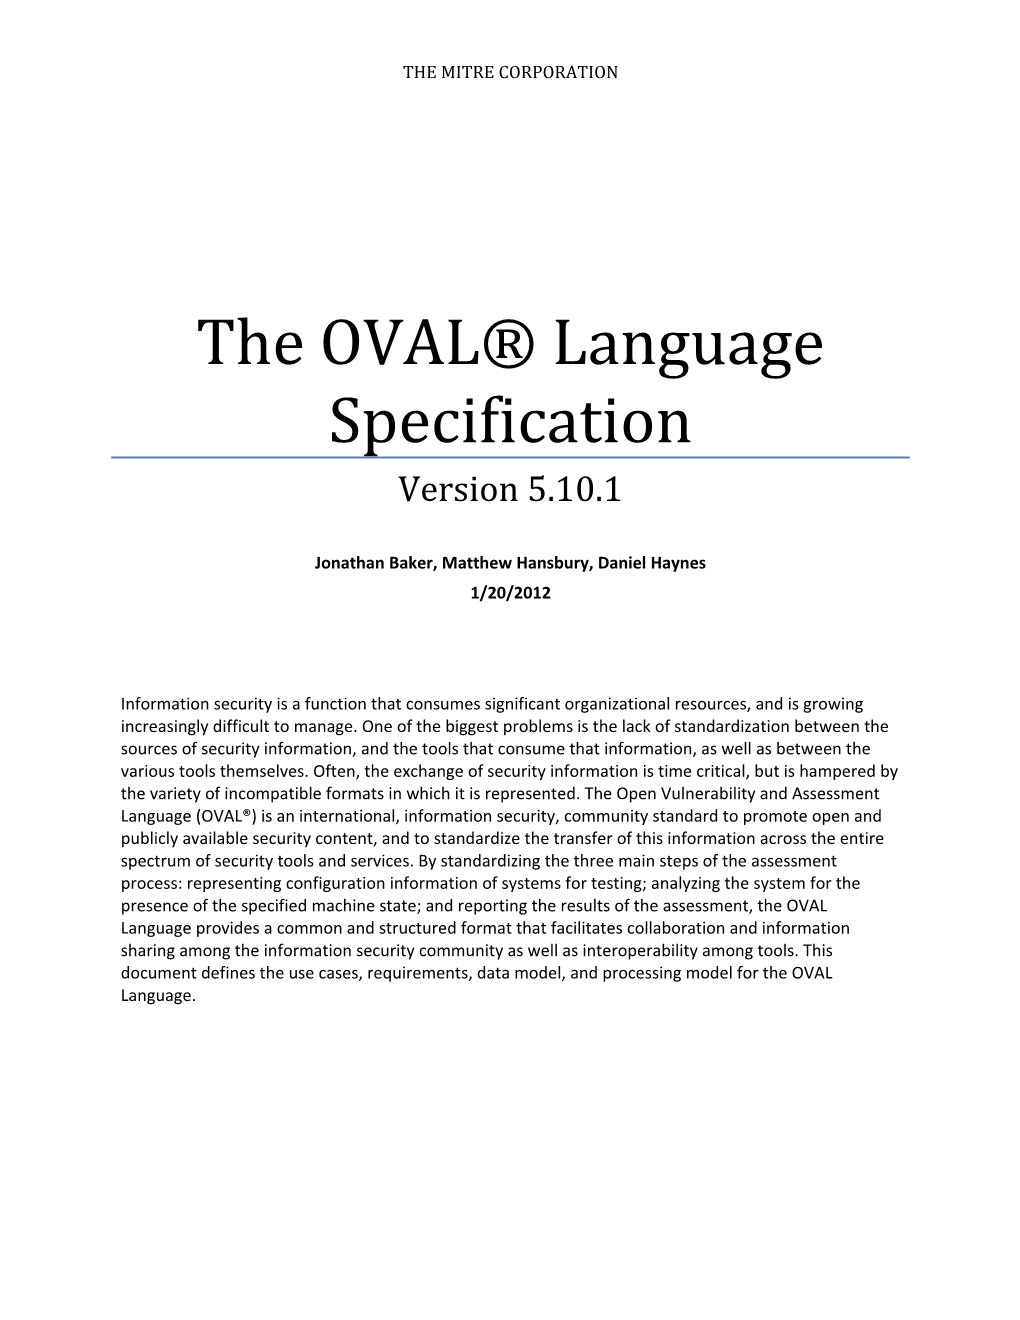 The OVAL Language Specification